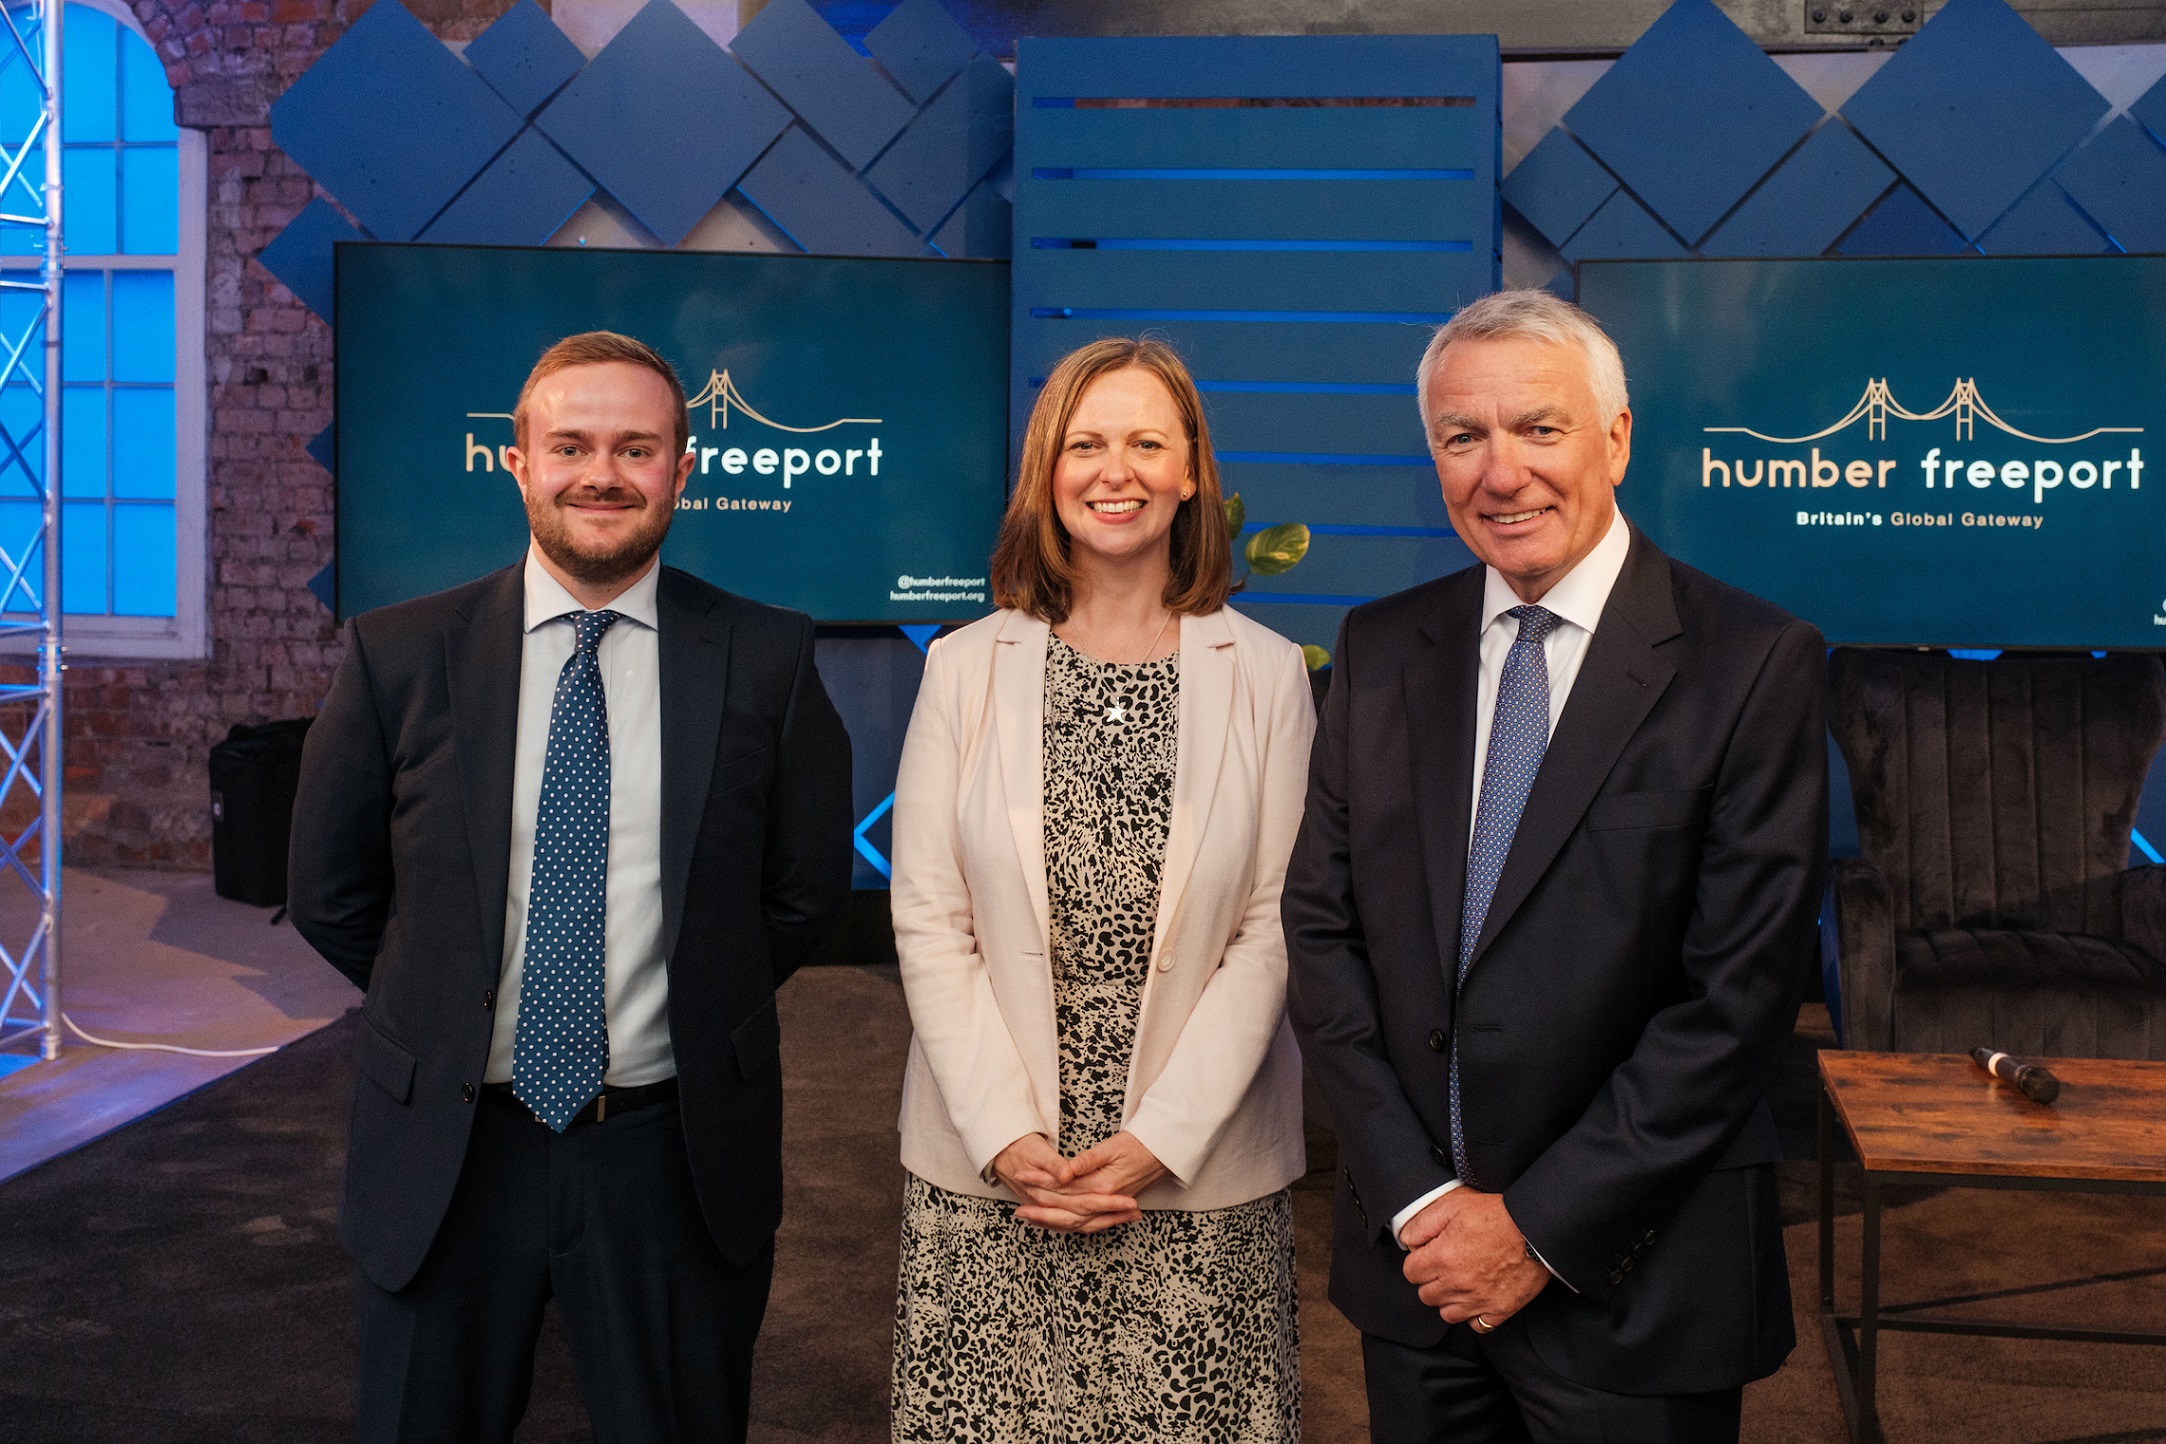 Humber Freeport launches with ambition to generate huge investment and over 7,000 jobs